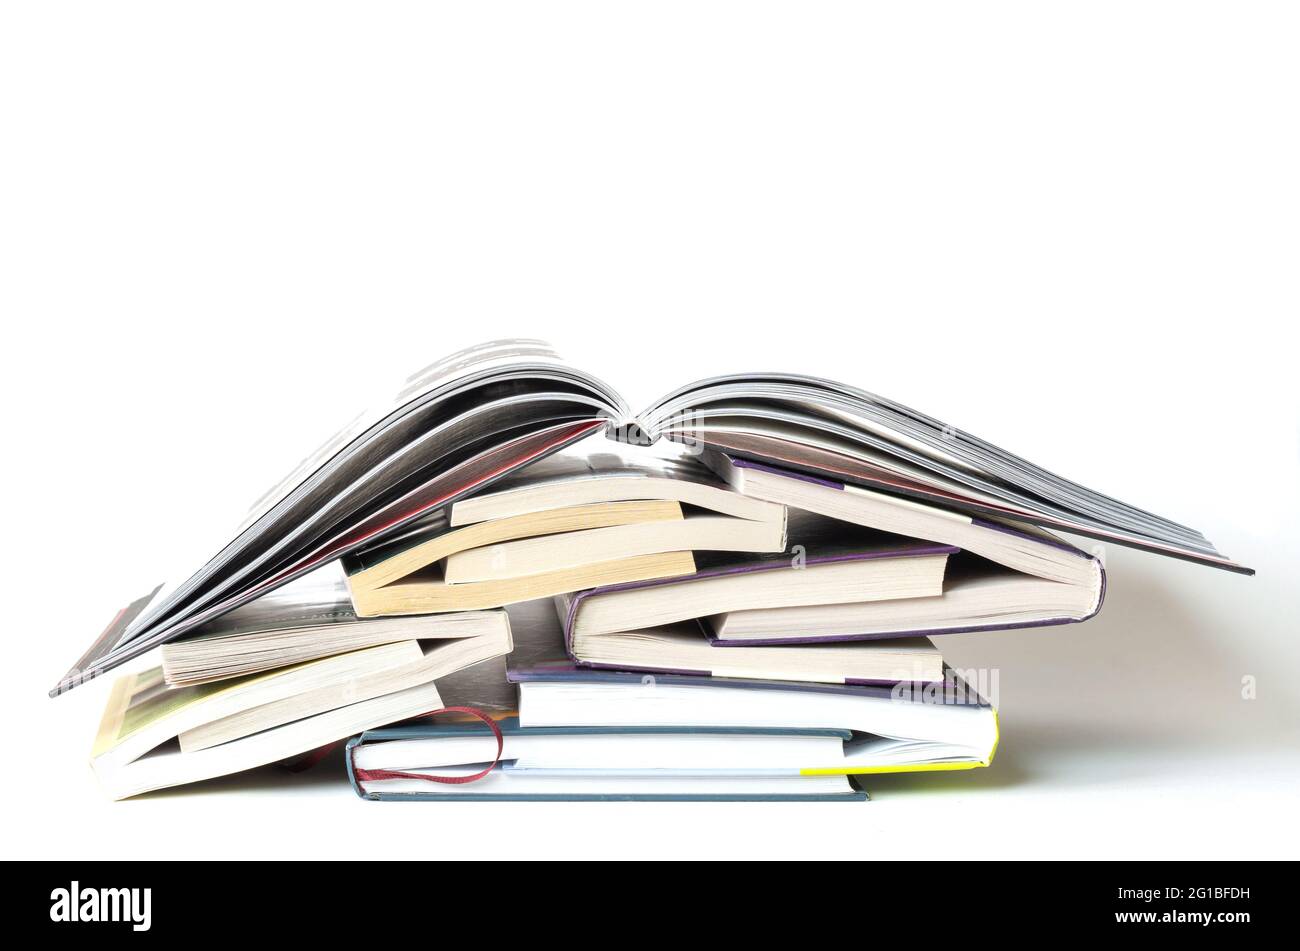 Stack of hardcover books on white background Stock Photo